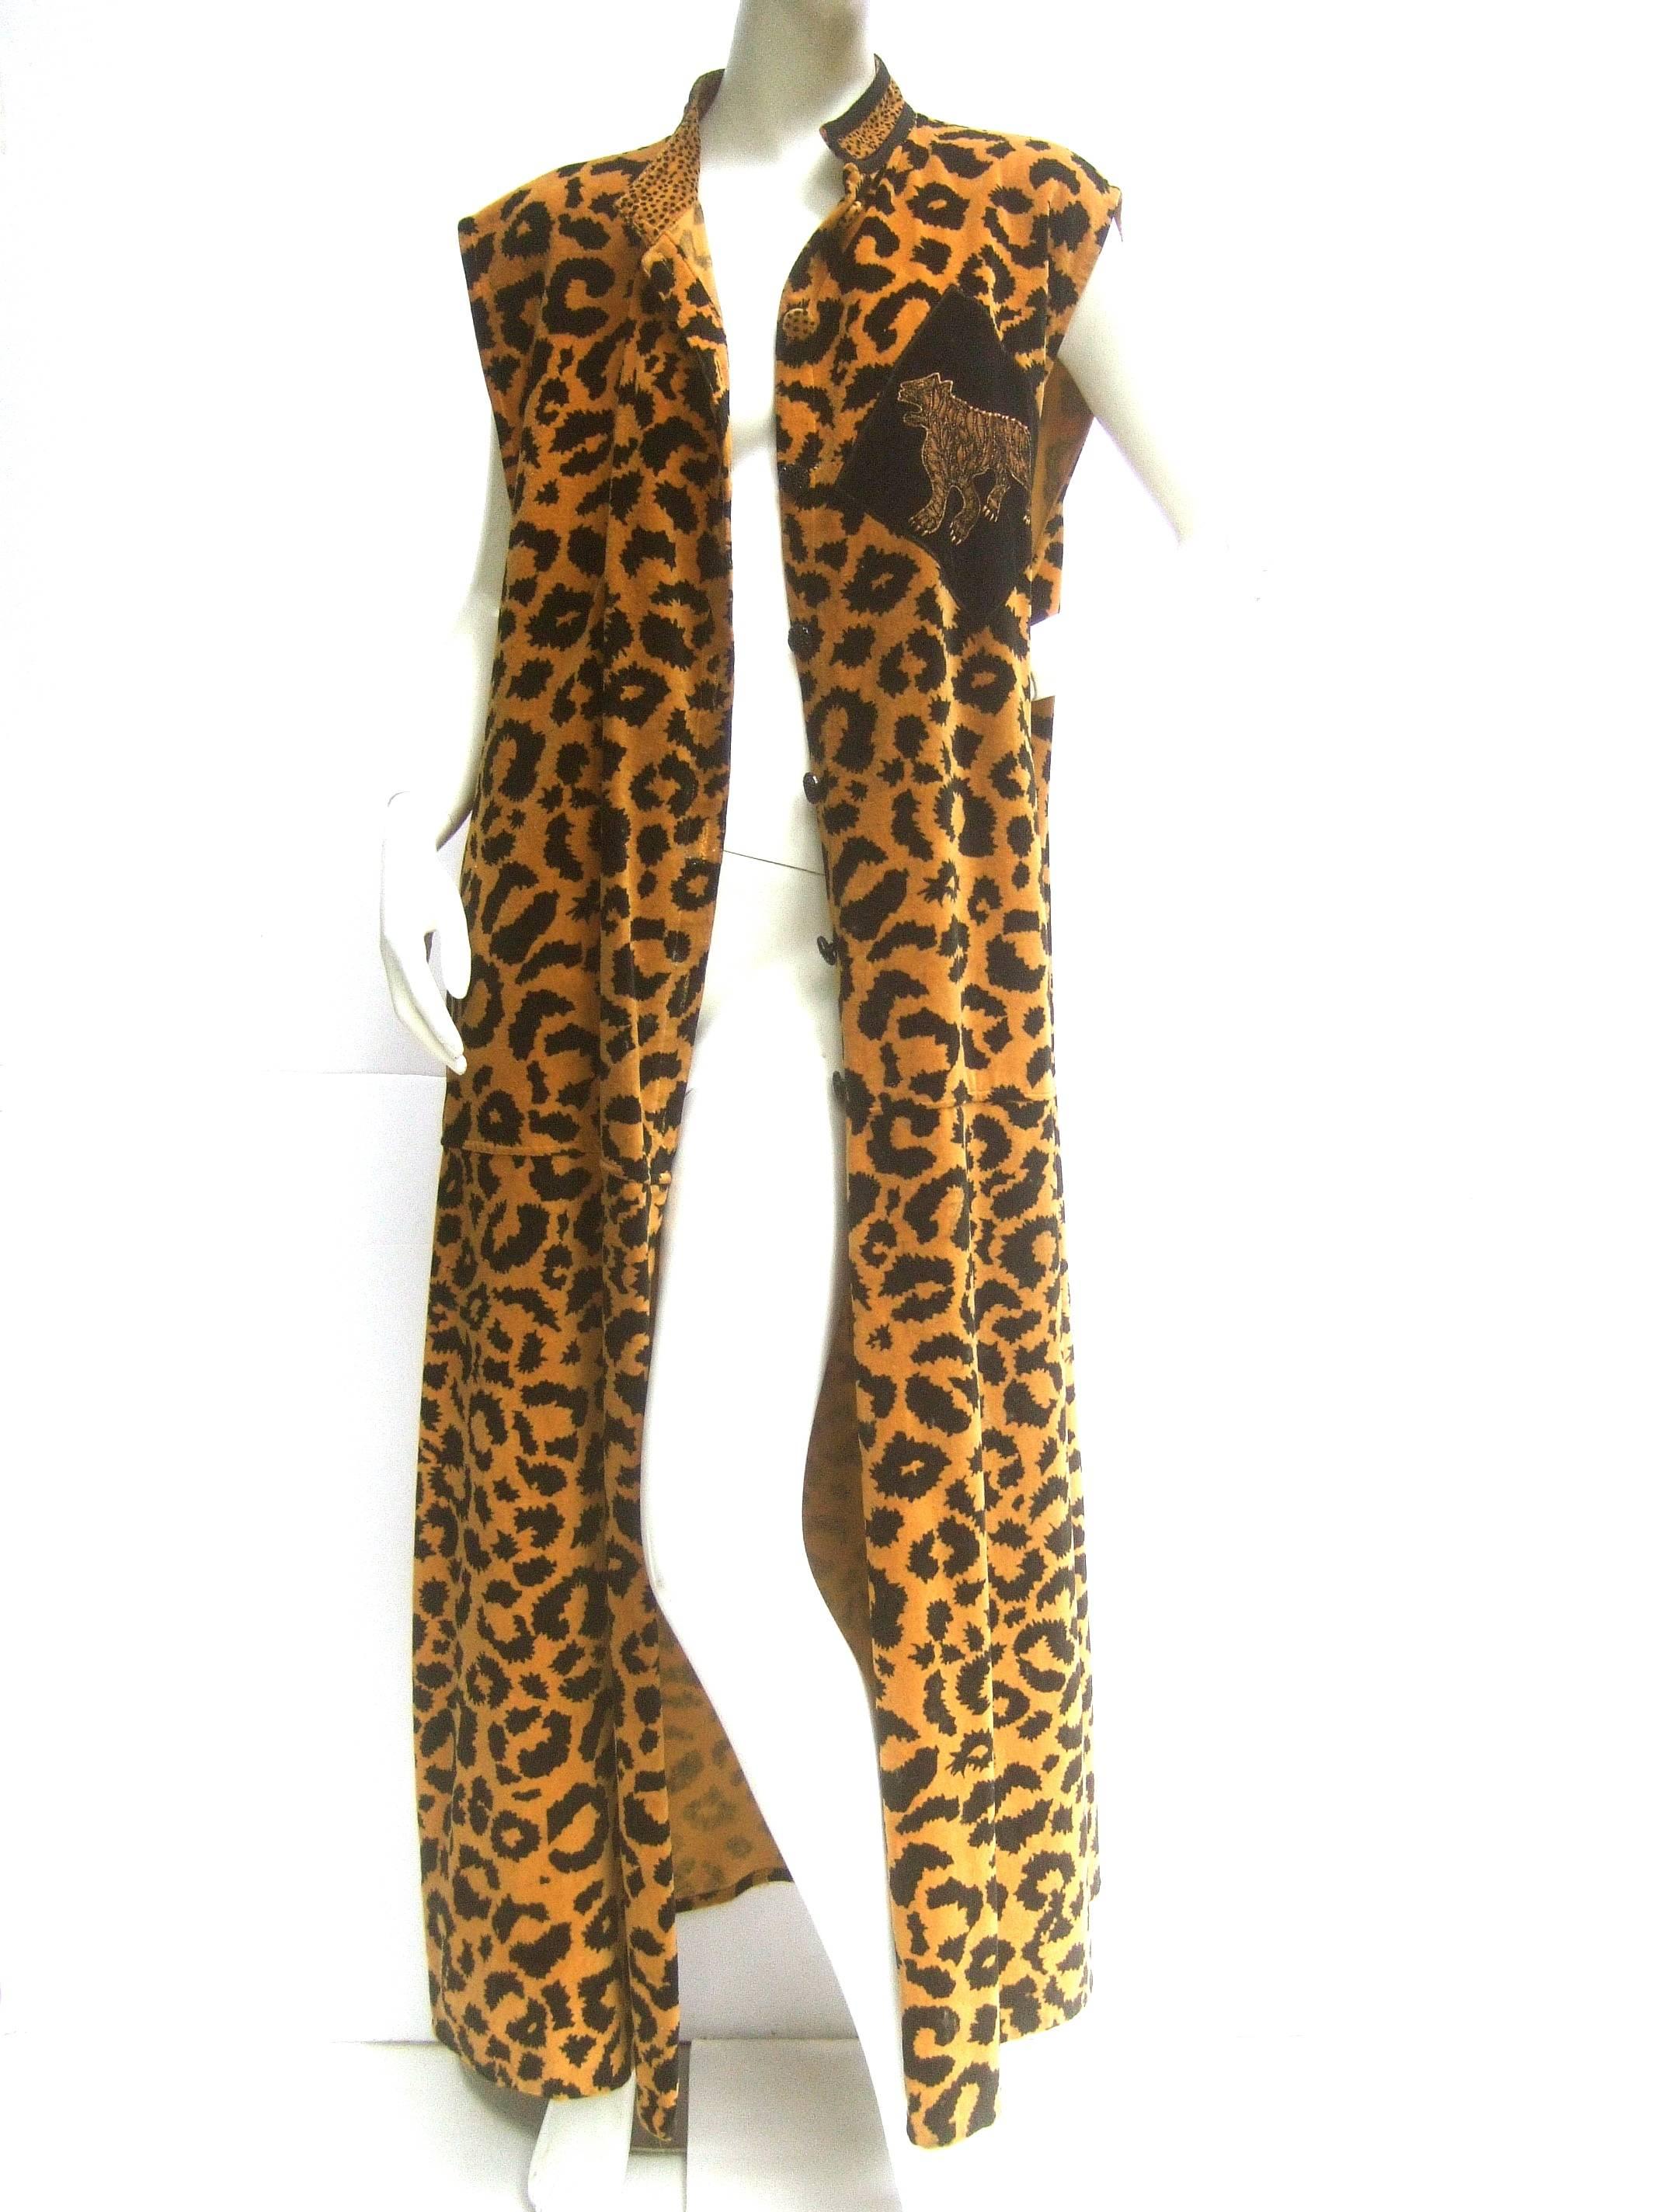 Exotic cotton velvet animal print maxi vest c 1980s
The dramatic long sweeping vest is illustrated 
with bold animal print graphics throughout 

One side of the chest is designed with an
applique jungle tiger. The back side also
has an